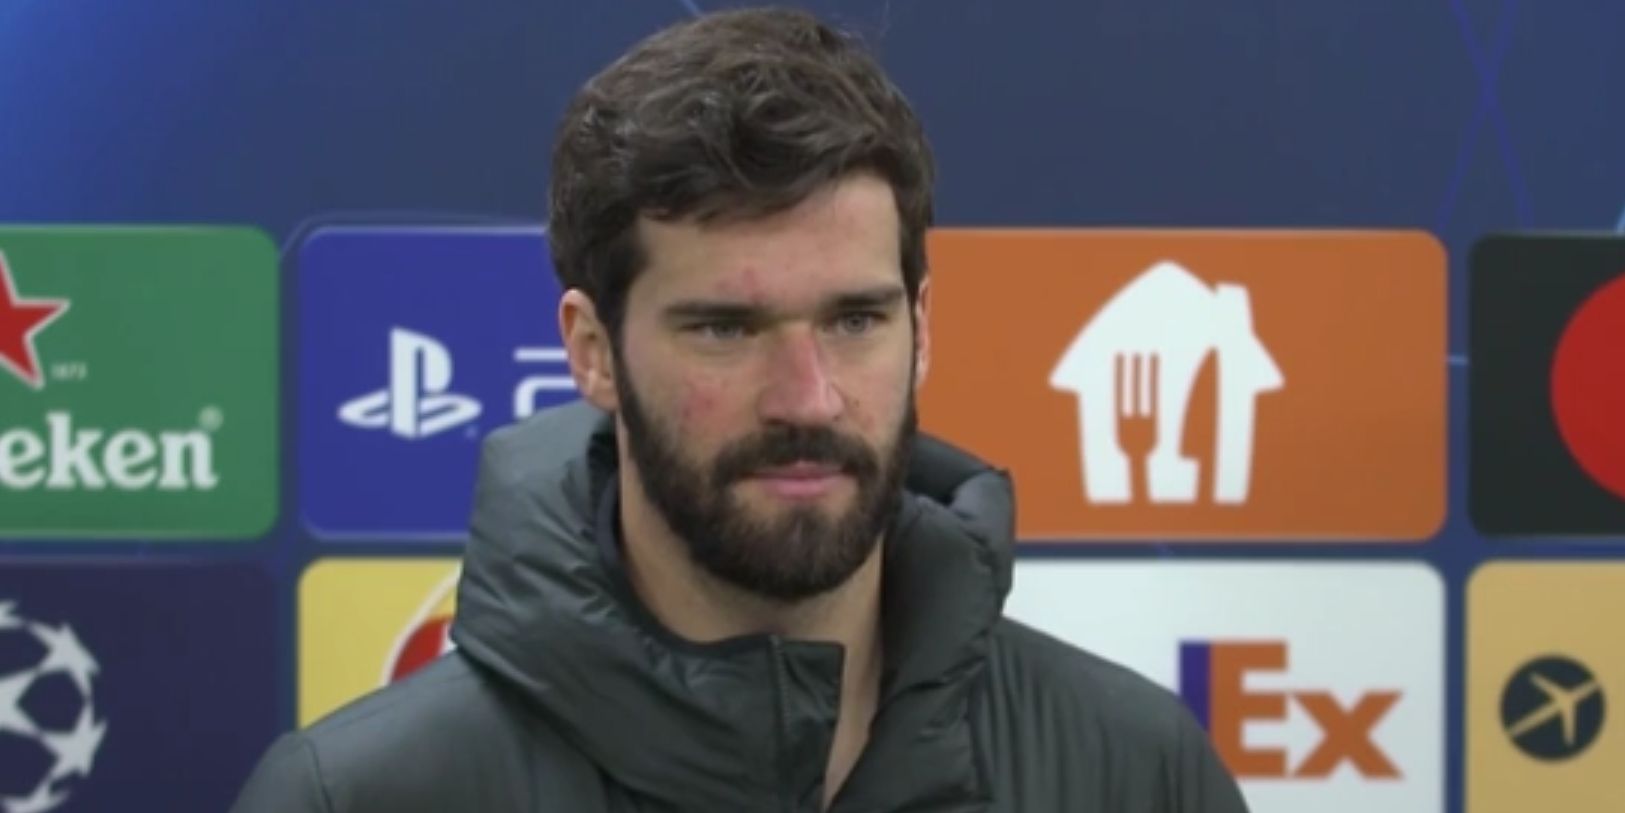 (Video) “He’s got eyes on his back!” – Alisson Becker full of praise for Trent Alexander-Arnold after another brilliant passing display